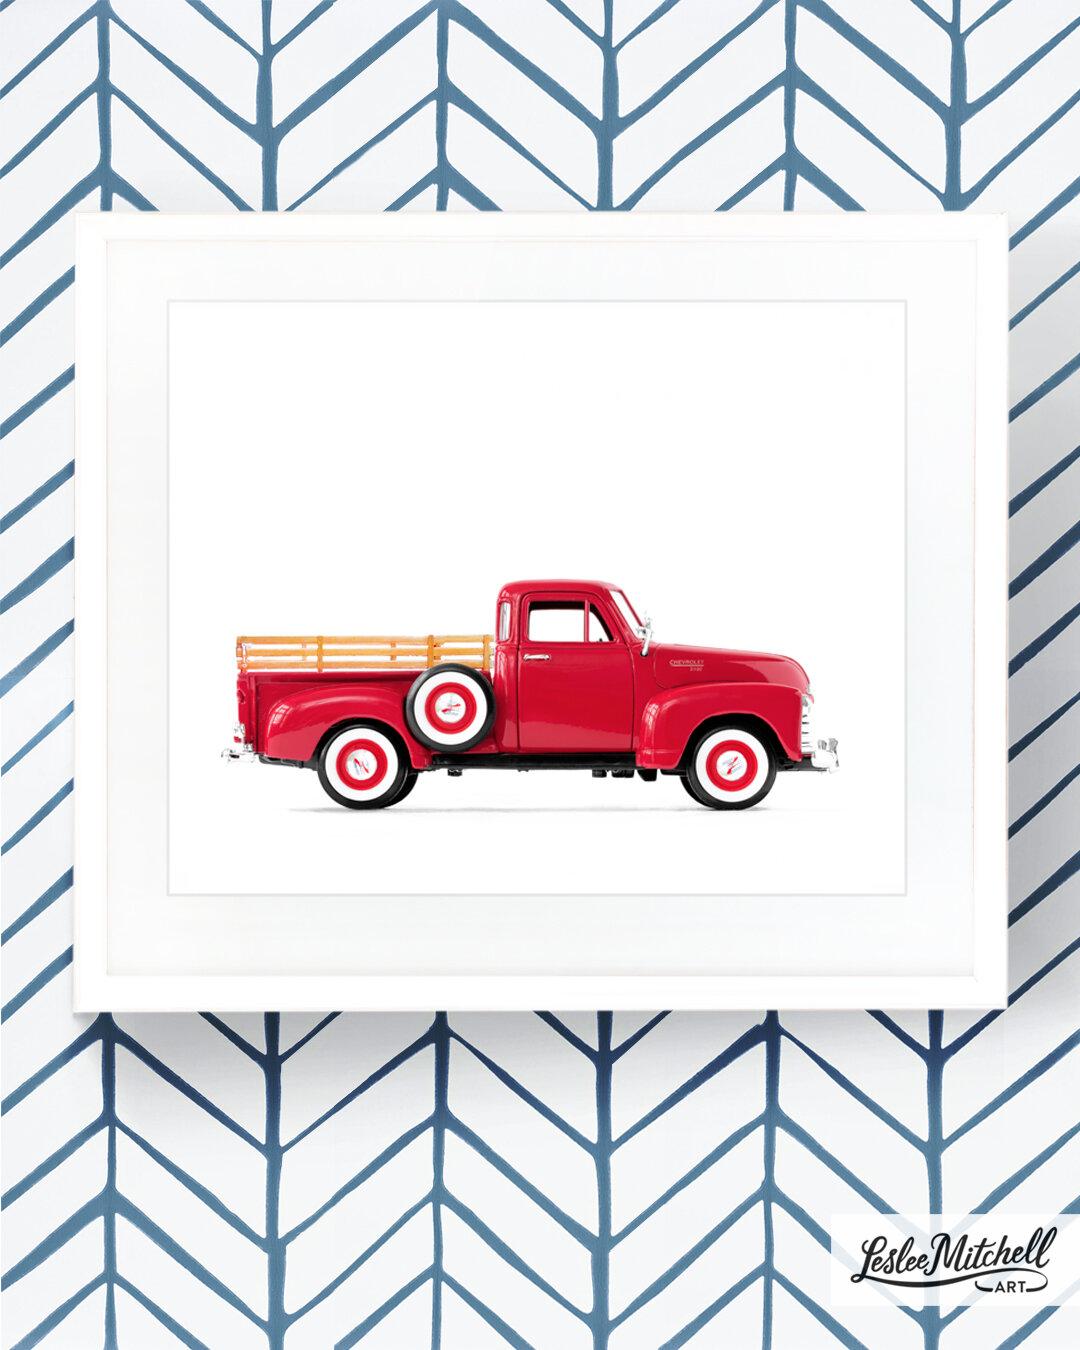 Car Series - Old Red Pickup Truck